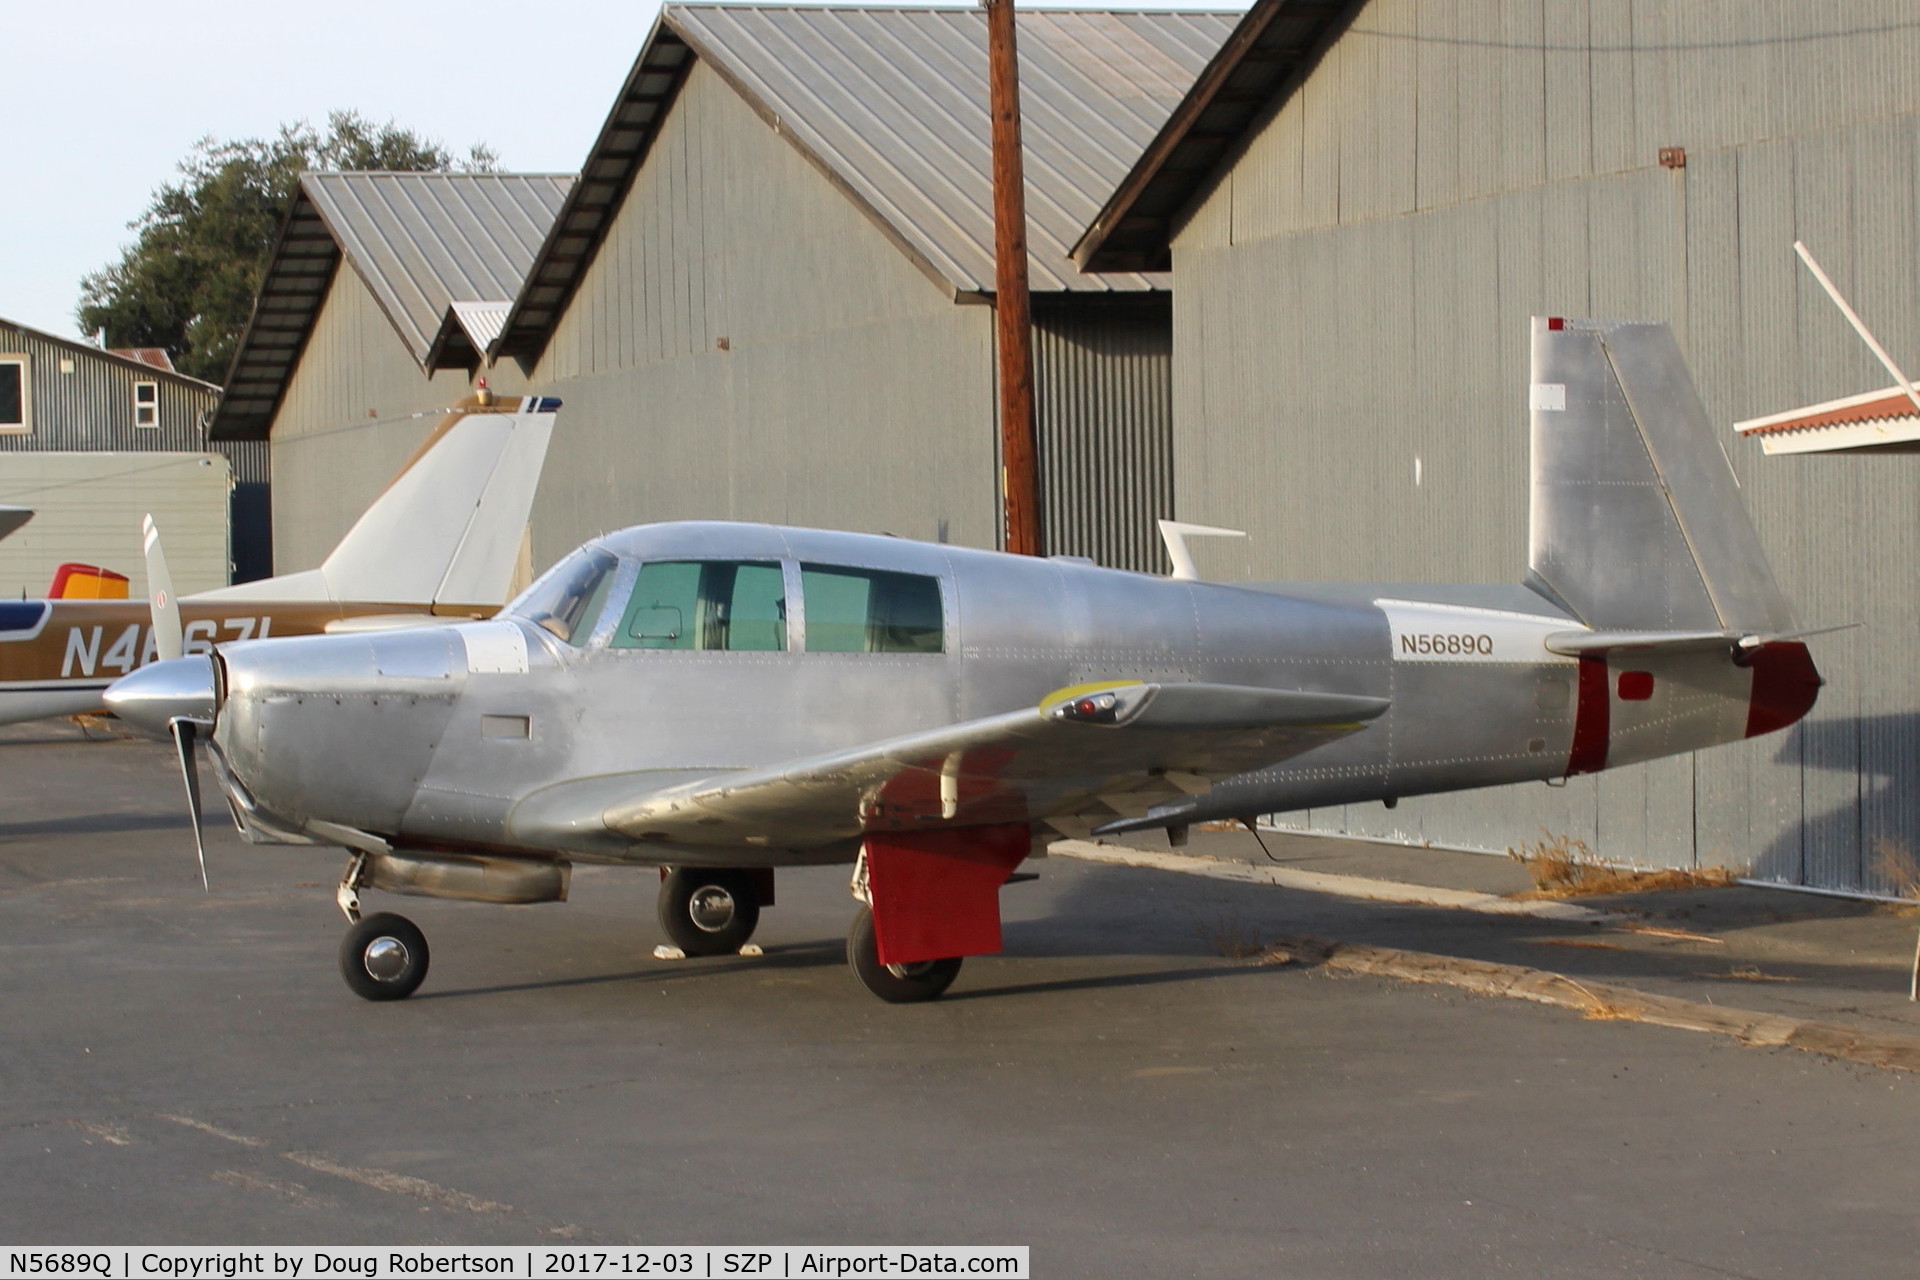 N5689Q, 1965 Mooney M20C Ranger C/N 3043, 1965 Mooney M20C MARK 21, Lycoming O&VO-360 180 Hp, LASAR mod to wing/fuselage leading edge junctions by STC lowers stall speed.